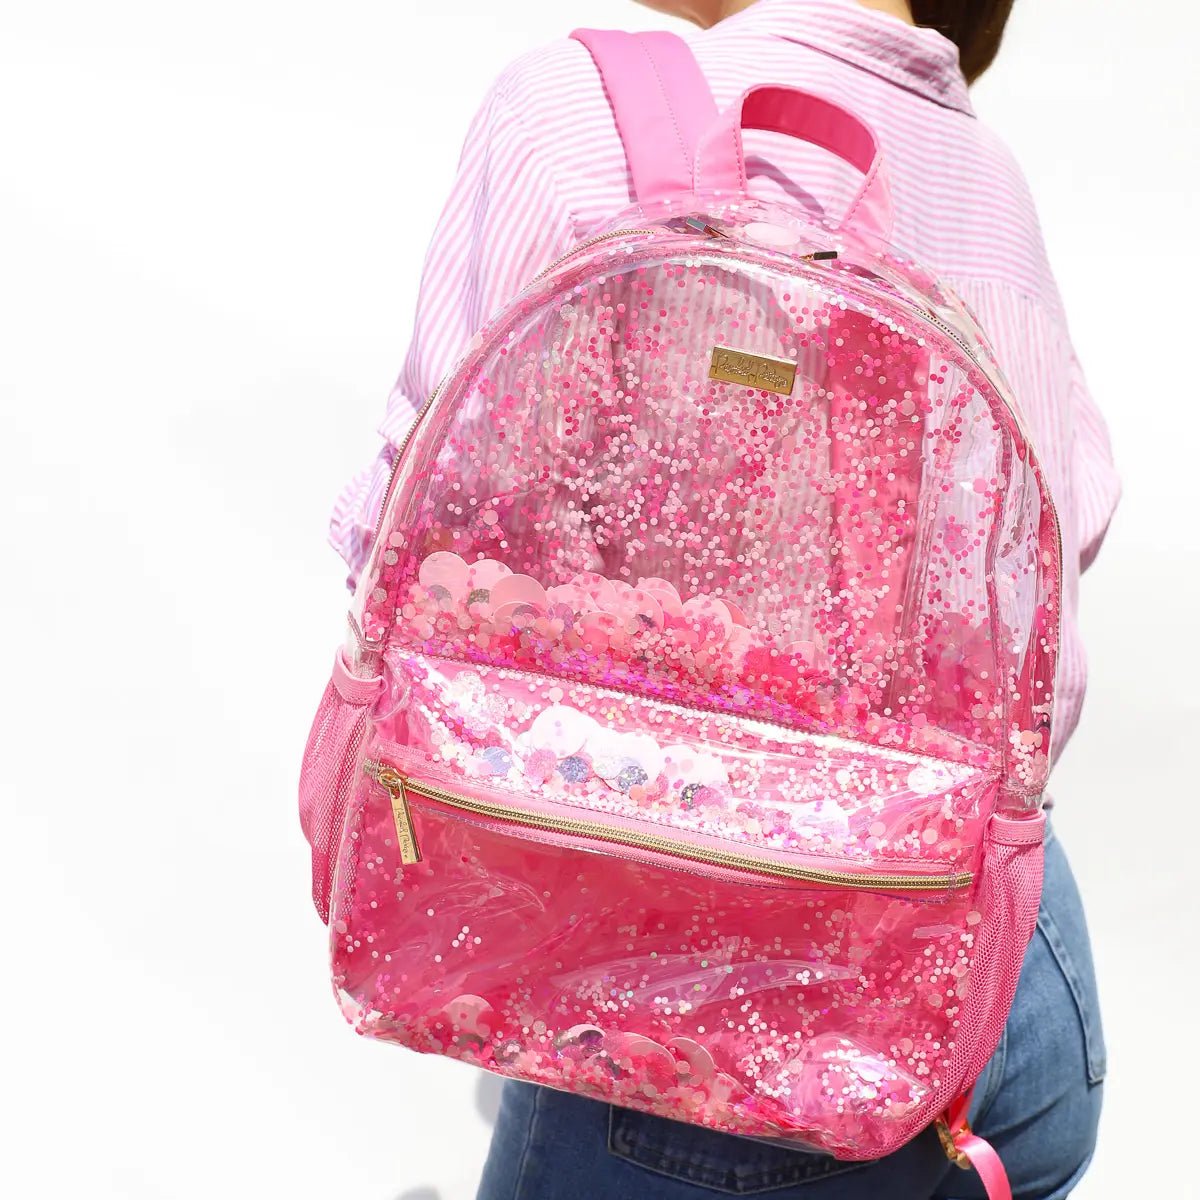 Shop Packed Party Pink Party Confetti Pink Clear Backpack - Premium Backpack from Packed Party Online now at Spoiled Brat 